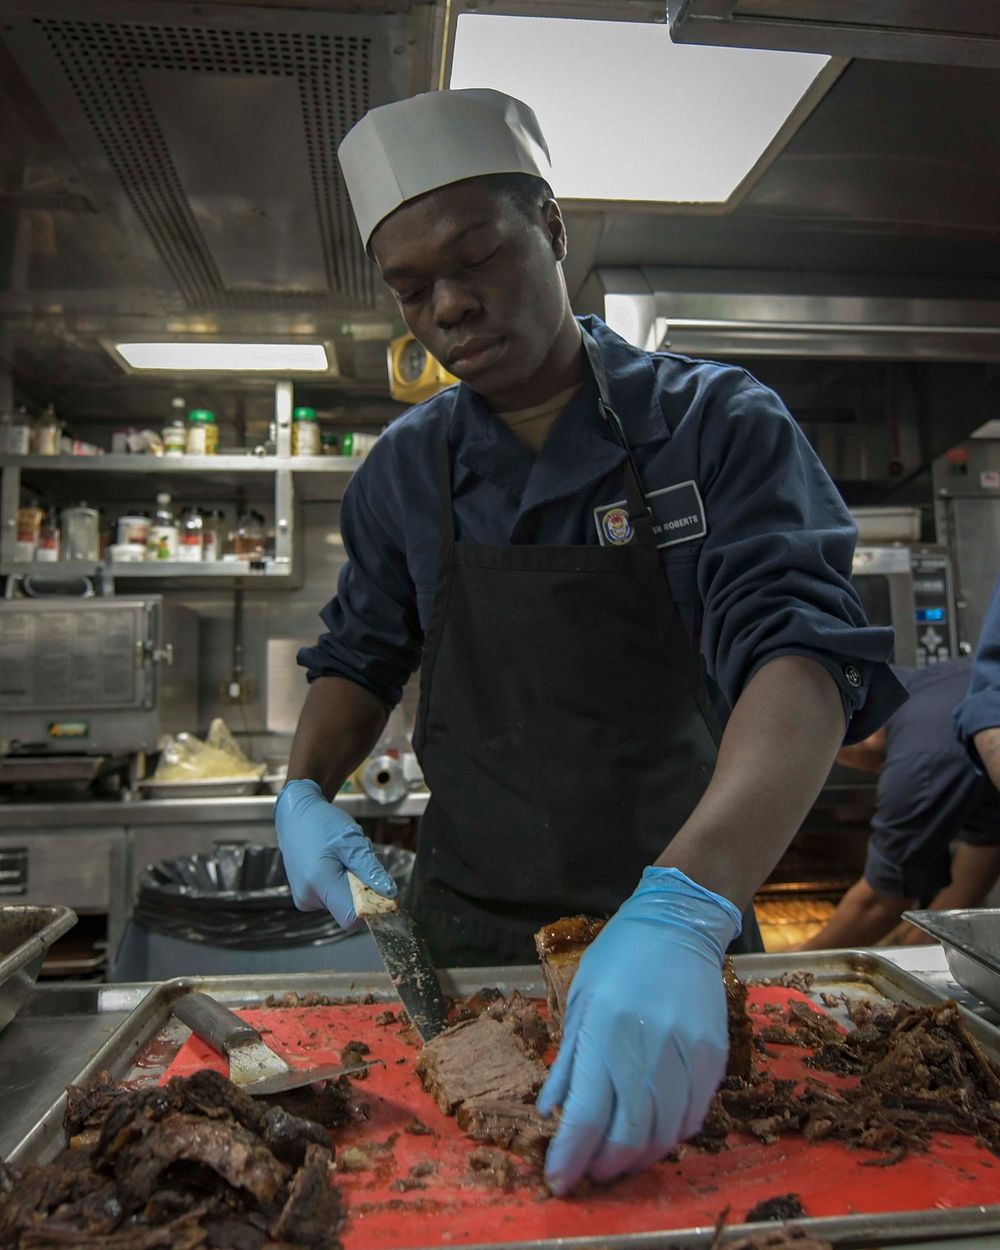 ATLANTIC OCEAN (May 19, 2019) &ndash; Culinary Specialist Seaman Cameron Roberts prepares a roast in the galley of the…